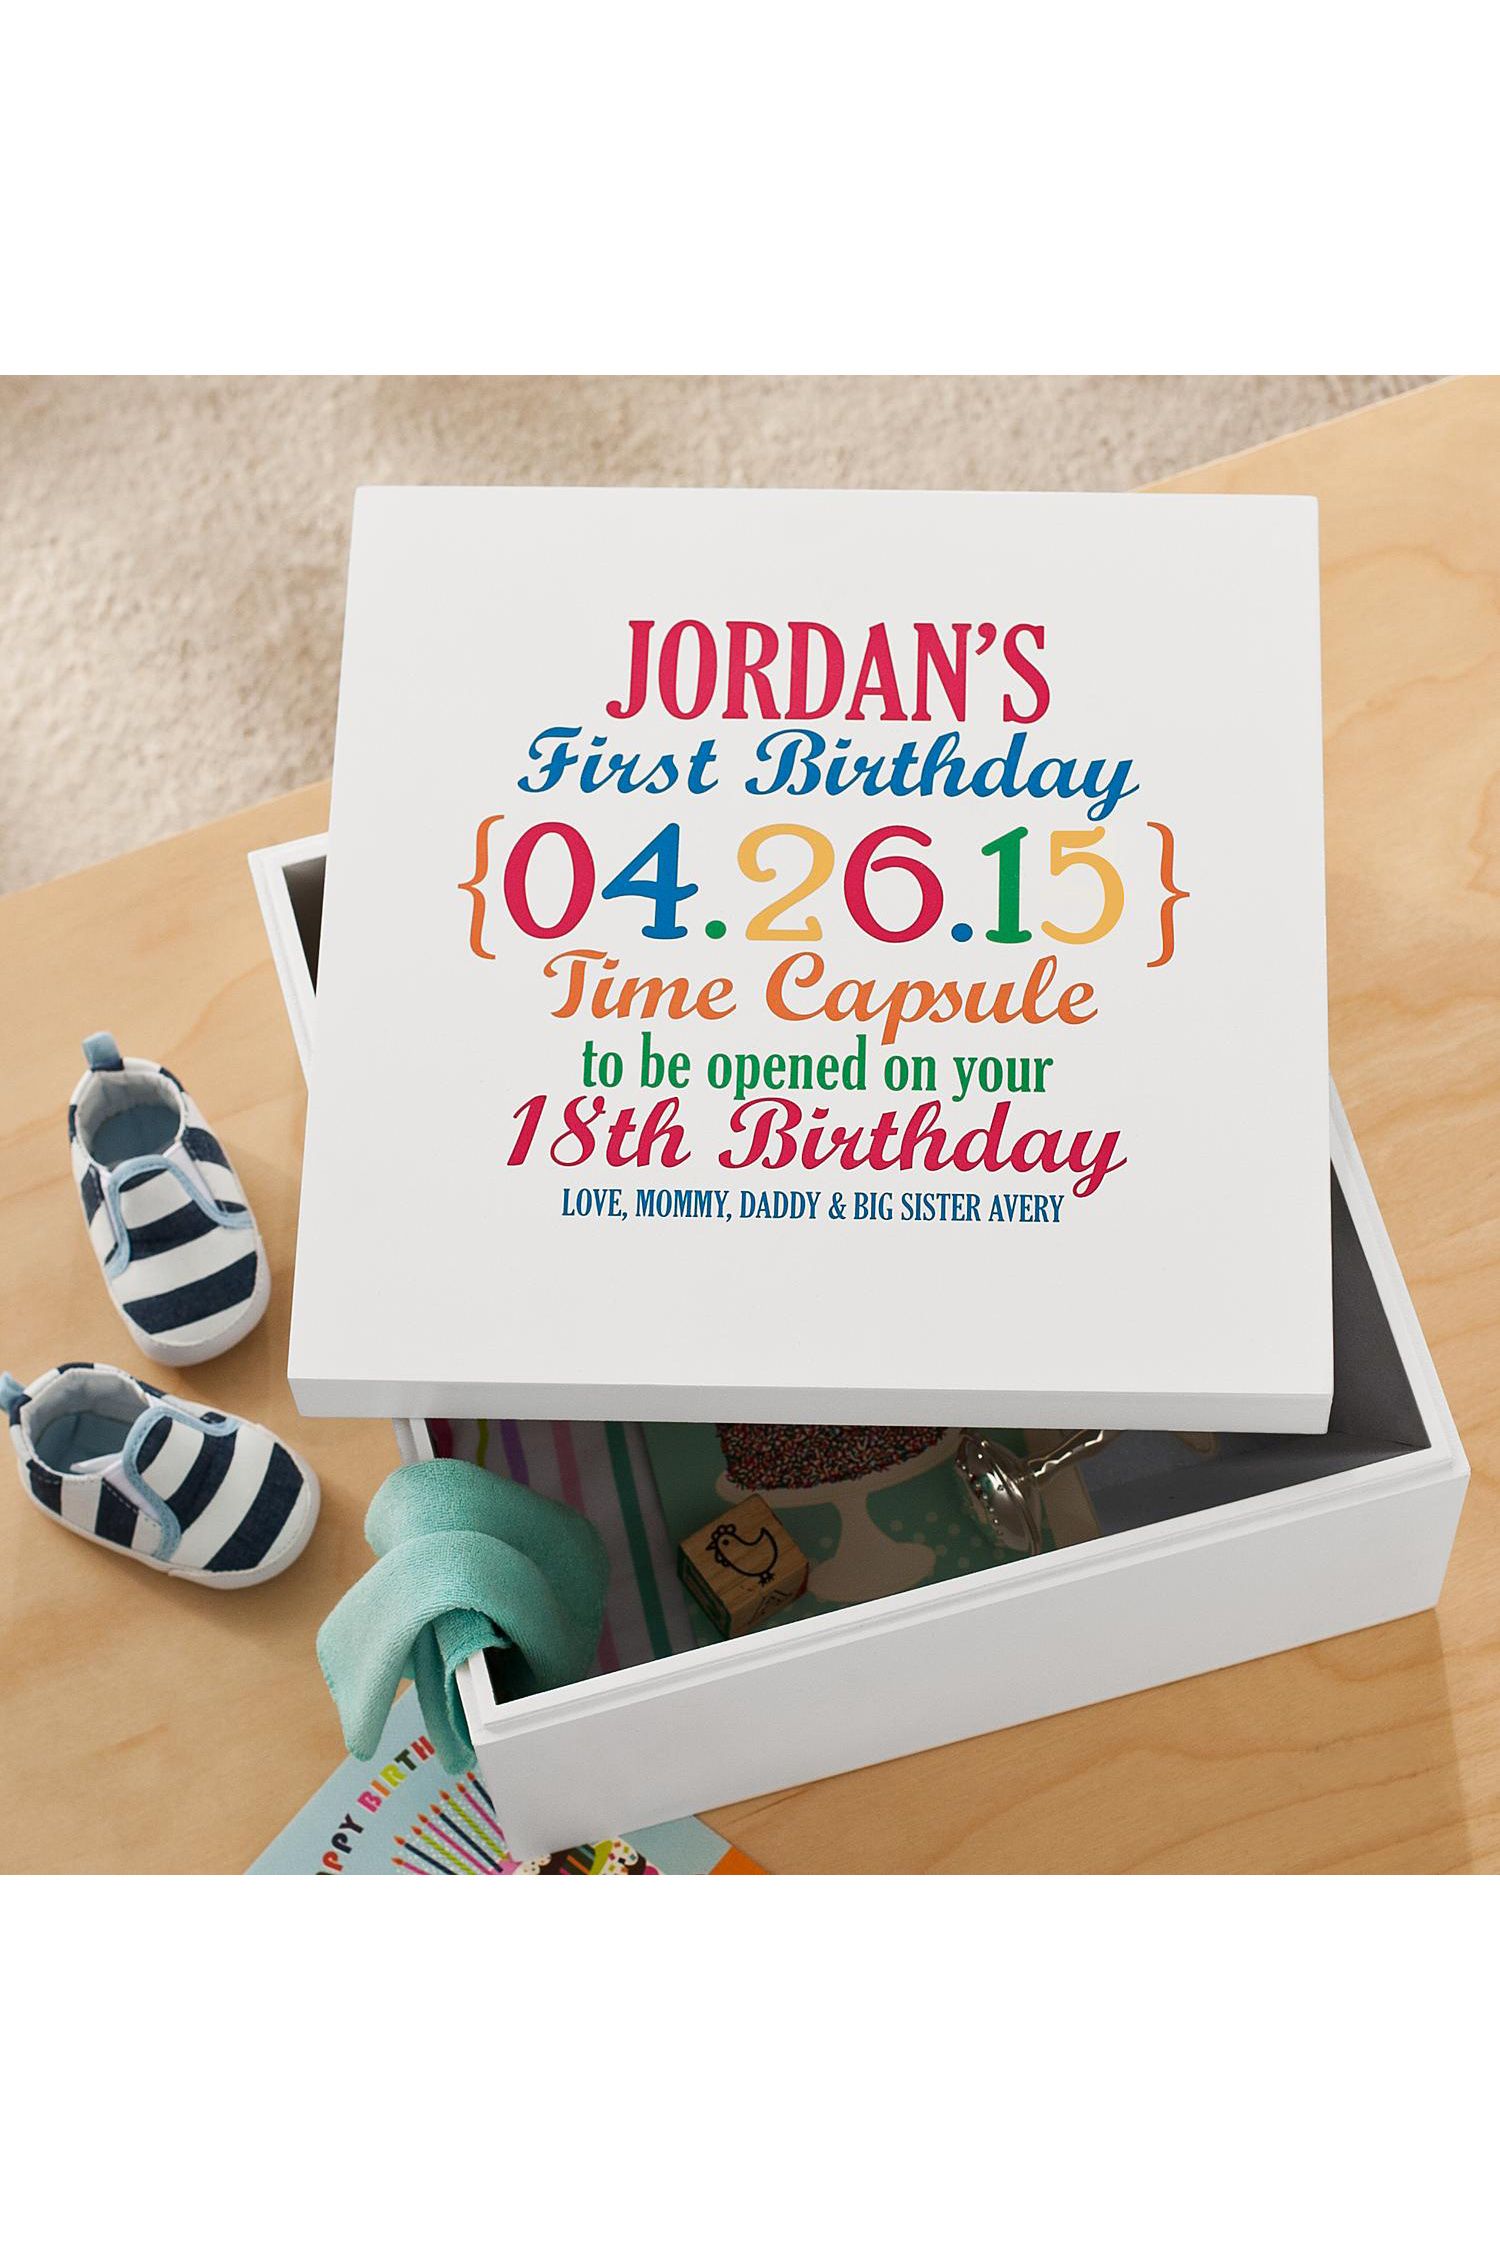 creative first birthday gifts